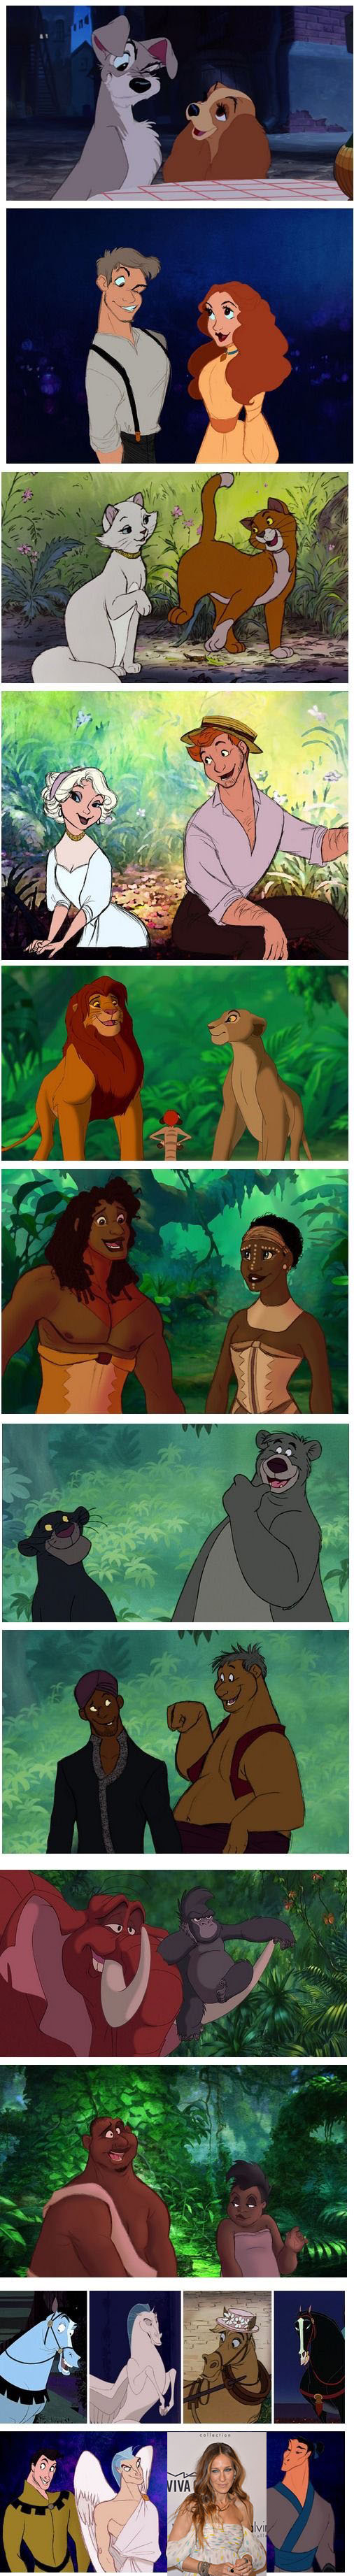 Disney animals and their human forms.